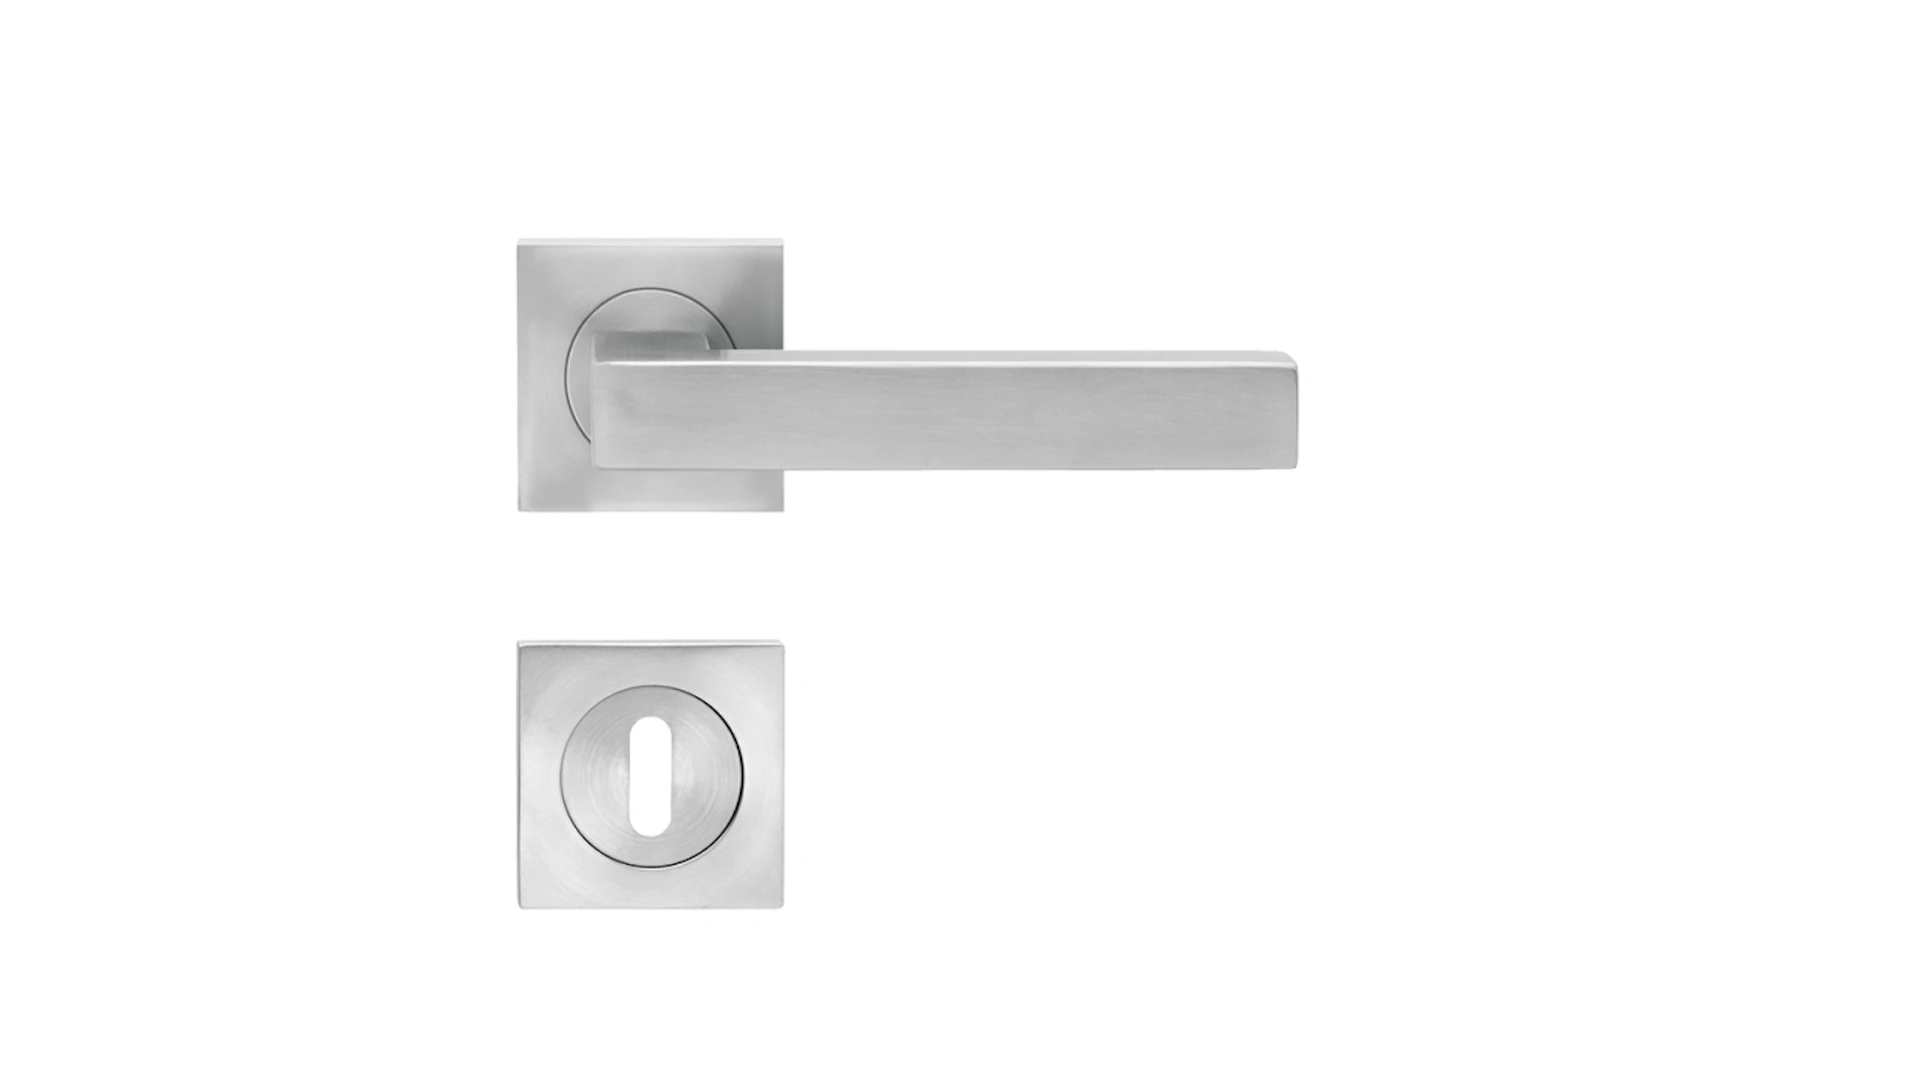 Lever handle Seatle ER46Q satin stainless steel - square rosettes with plain bezel